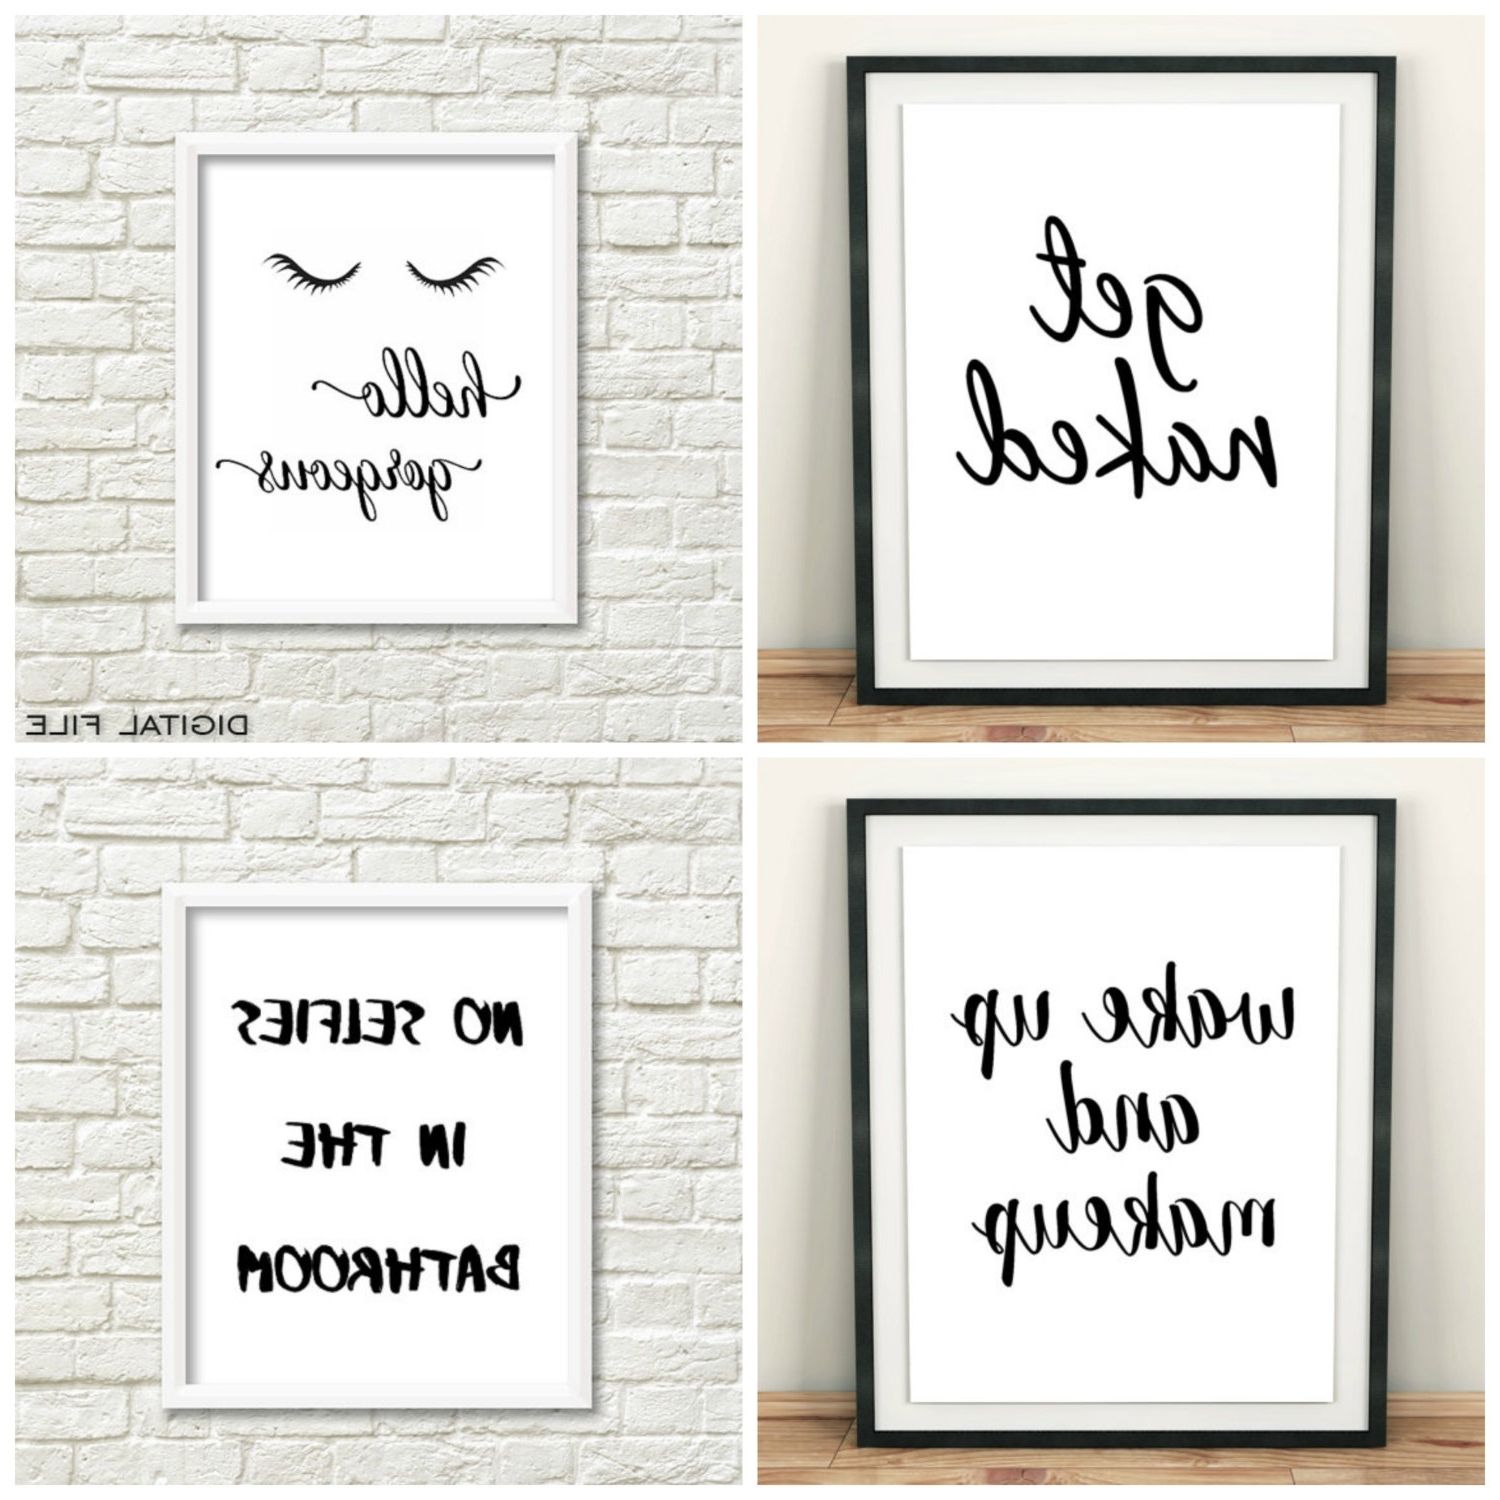 15 Ideas of Canvas Wall Art Funny Quotes